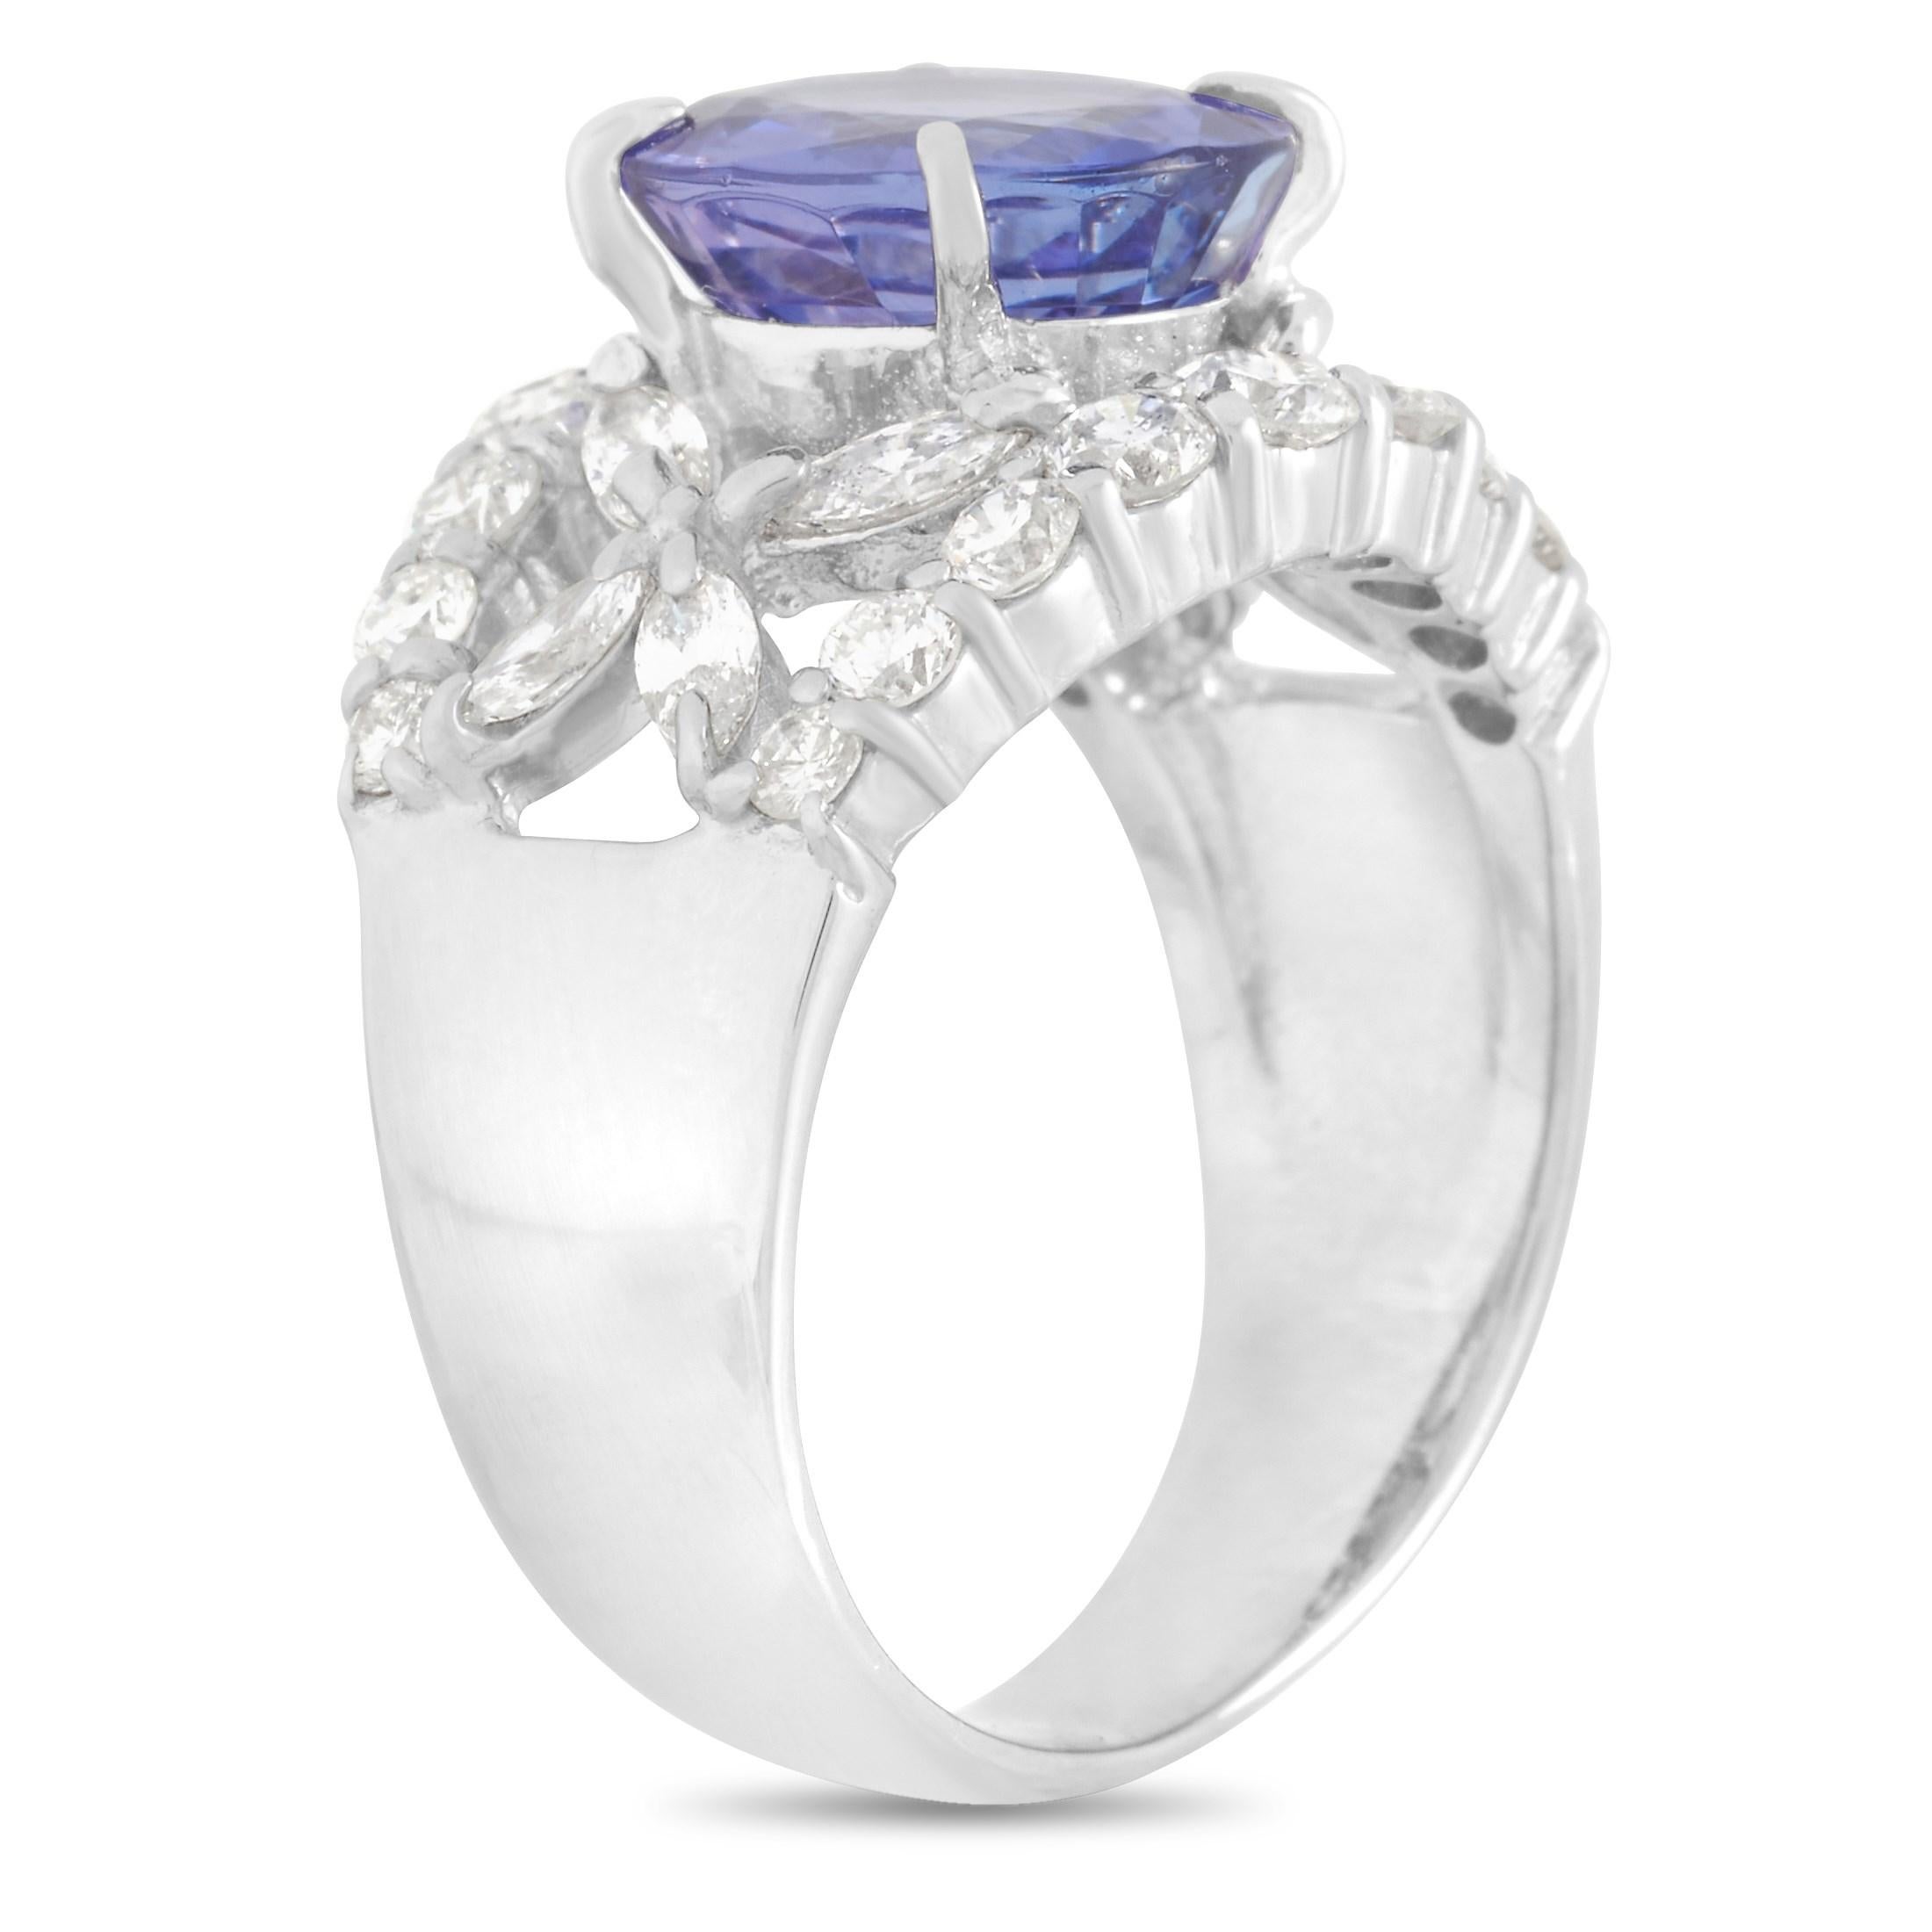 This beautiful LB Exclusive Platinum 1.22 ct Diamond 3.07 ct Tanzanite Ring is a classy statement piece The band is made with platinum and set with a total of 1.22 carats of round and marquise cut diamonds surrounding a gorgeous 3.07 carat round cut